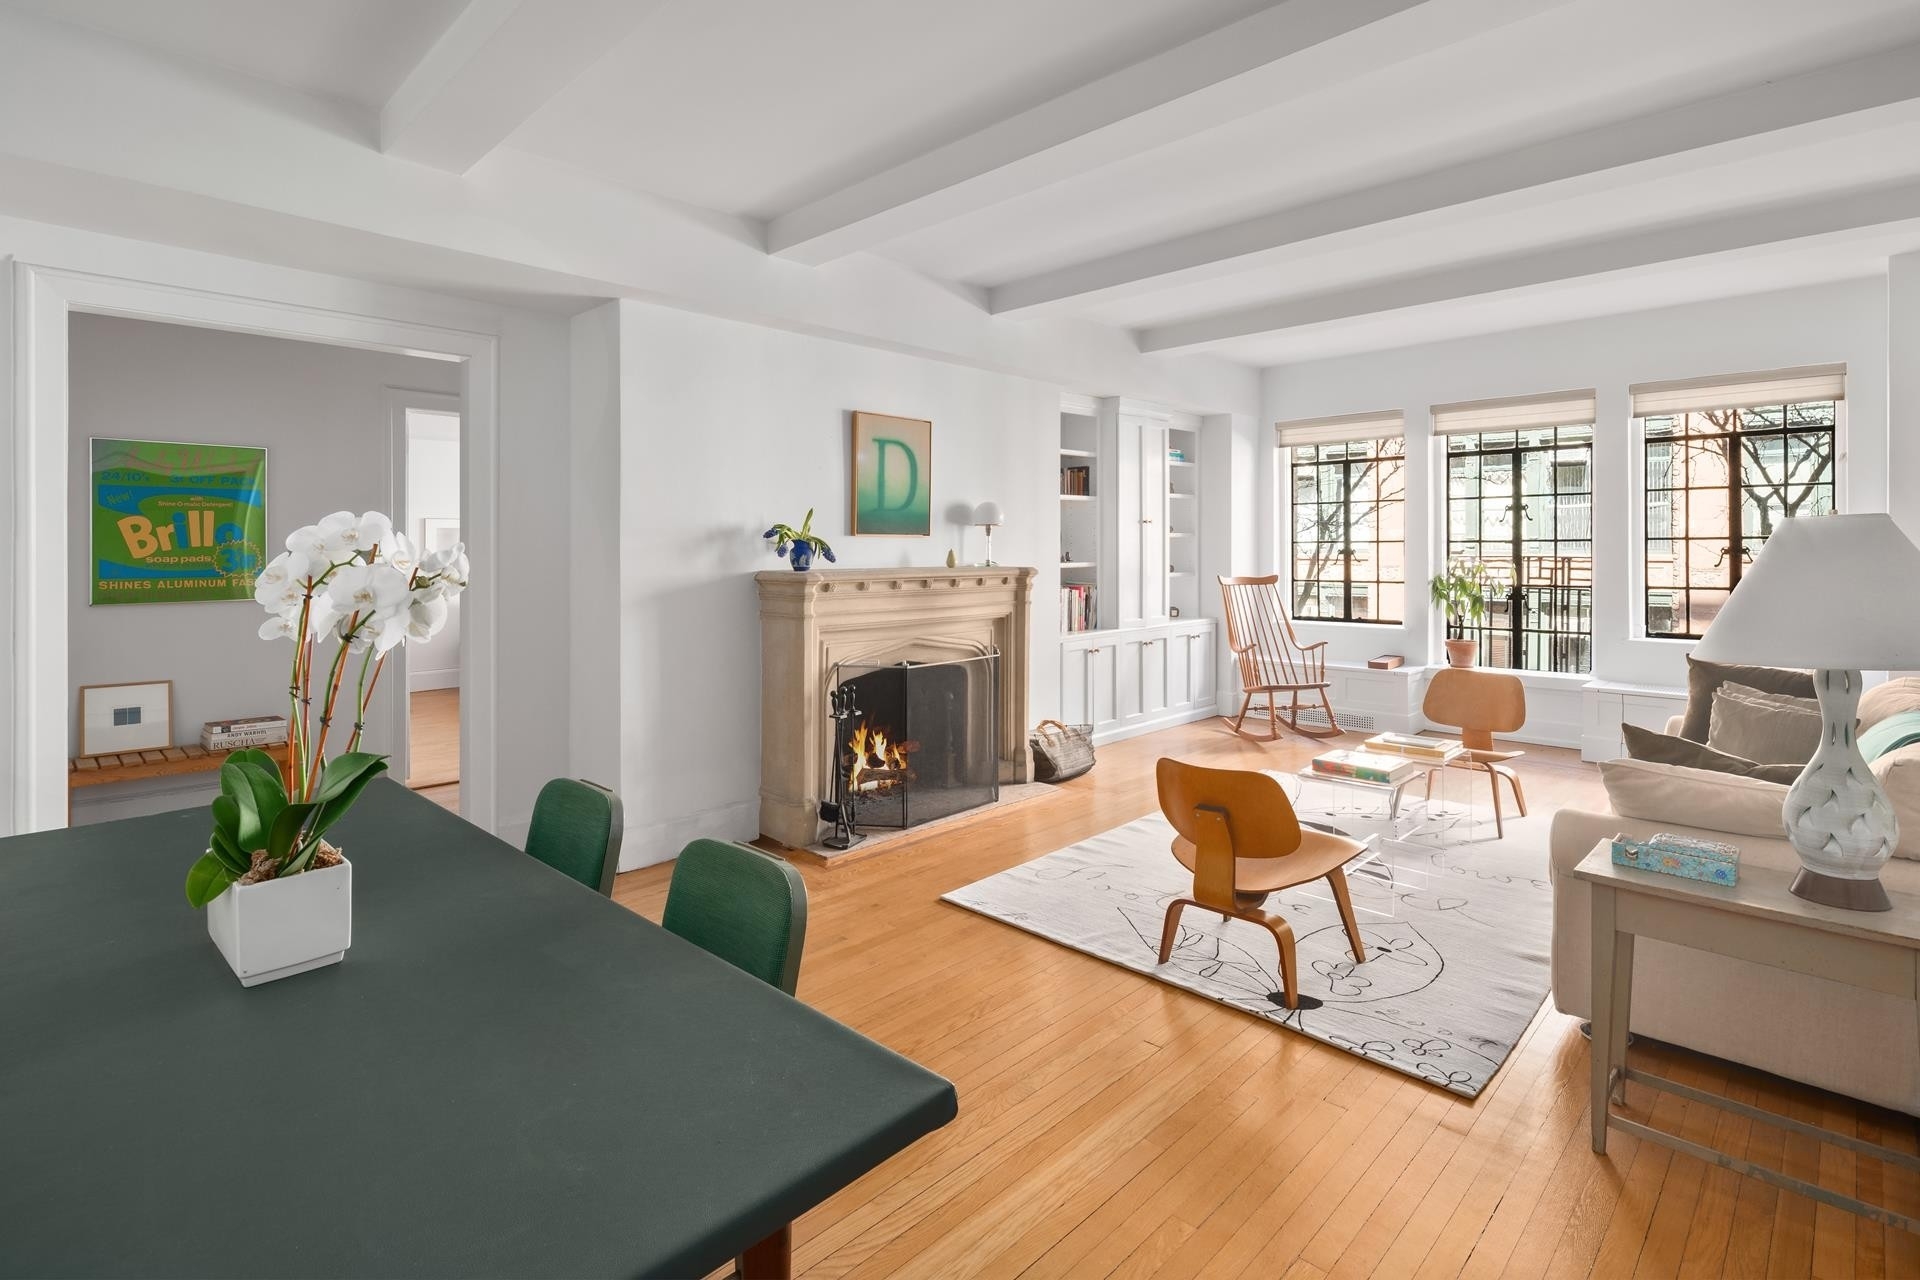 Co-op Properties for Sale at 40 E 10TH ST, 4G Greenwich Village, New York, NY 10003